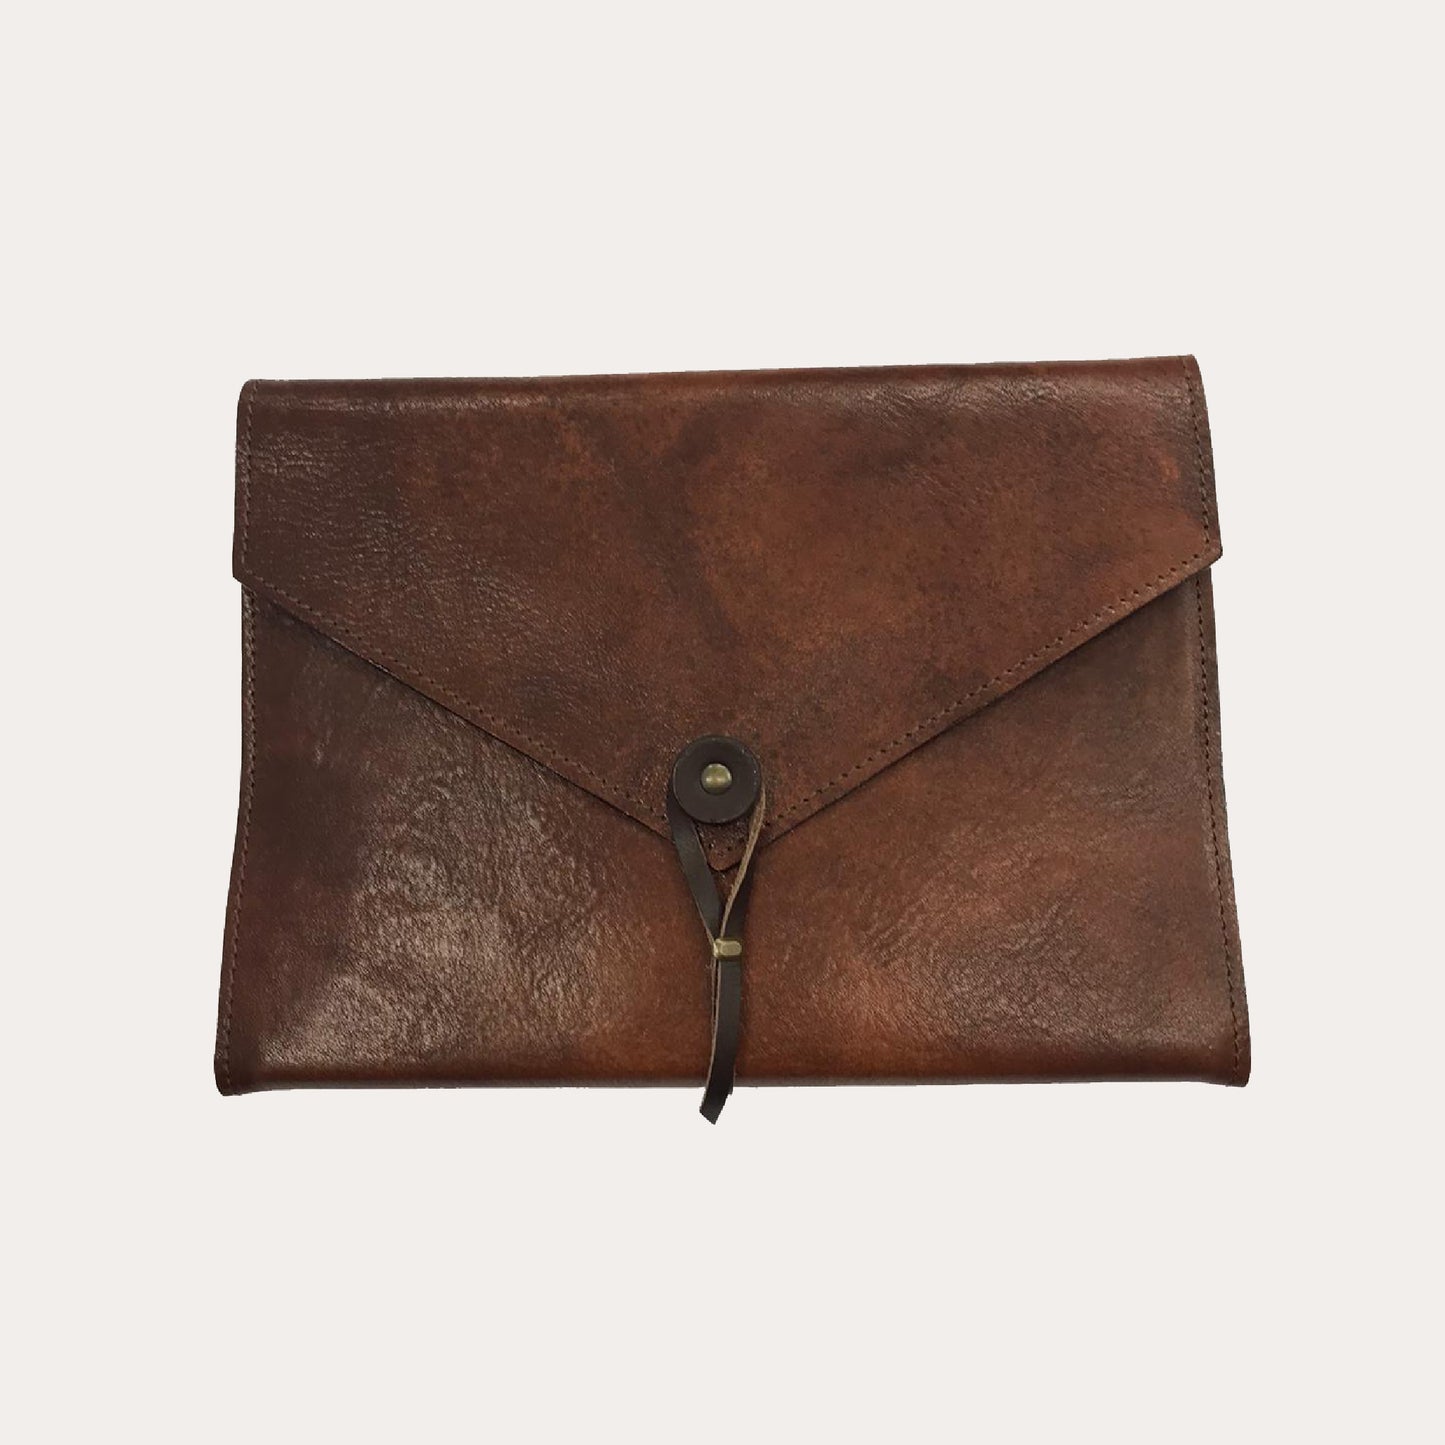 Chiarugi Vintage Look Leather A5 Notebook/Diary Cover